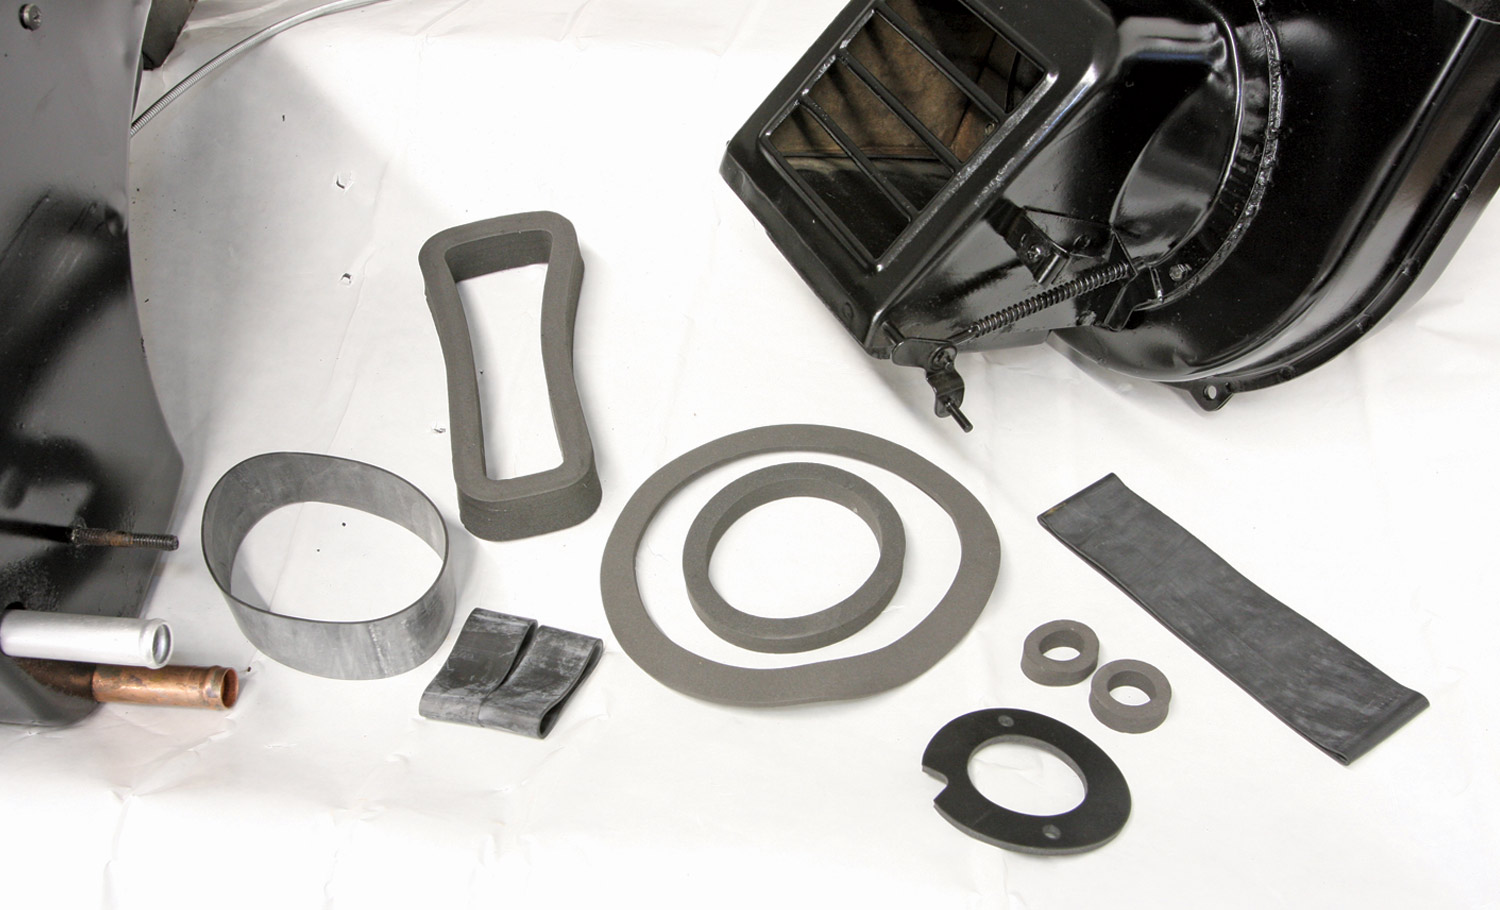 parts from a Danchuk’s Deluxe Heater Seal Kit (PN 322) laid out on a table